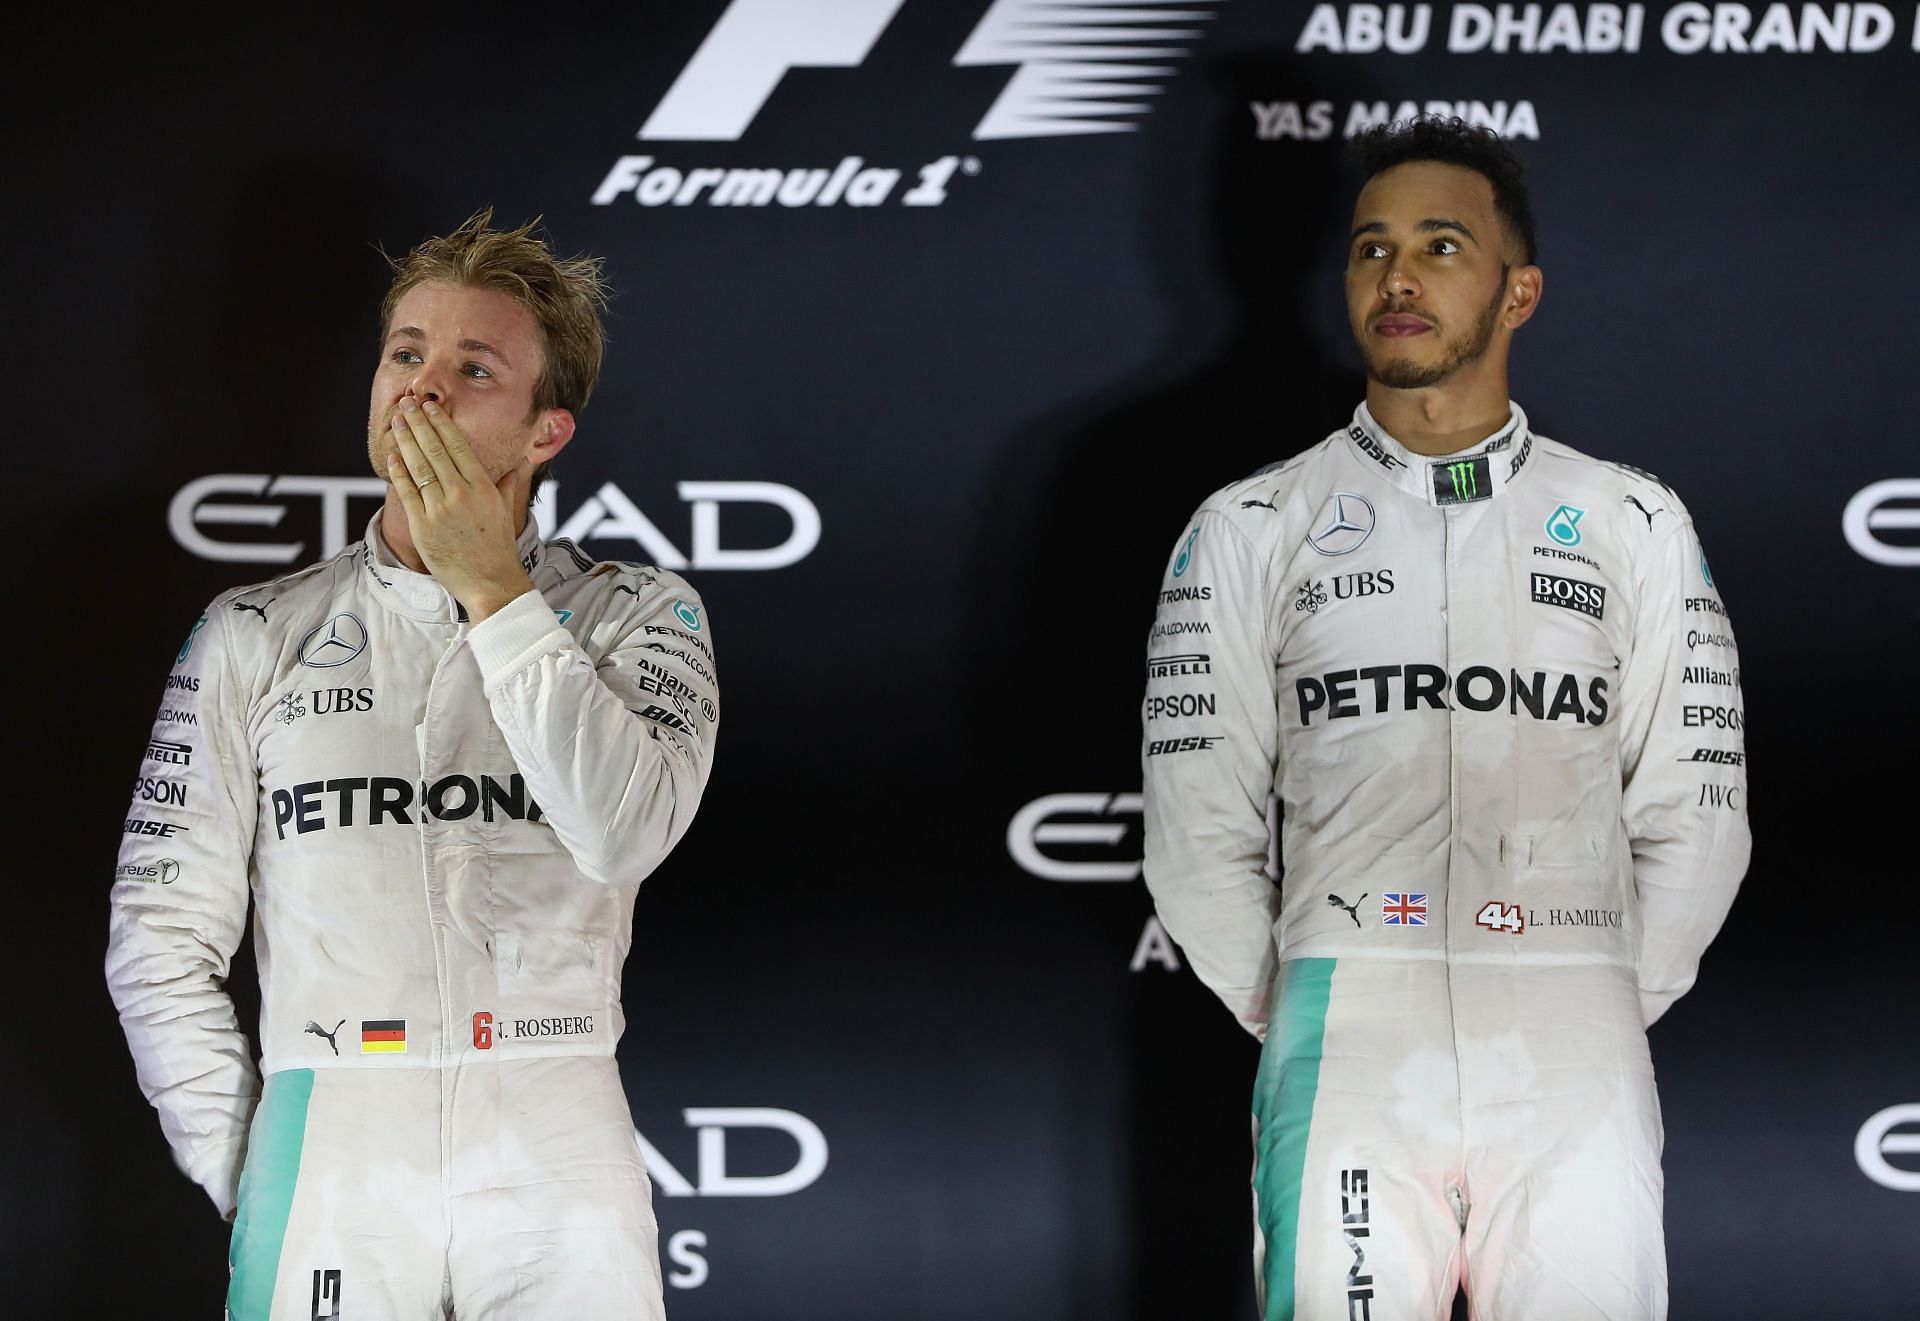 Nico Rosberg (left) and Lewis Hamilton (right) on the podium after the 2016 F1 Abu Dhabi GP. (Photo by Clive Mason/Getty Images)